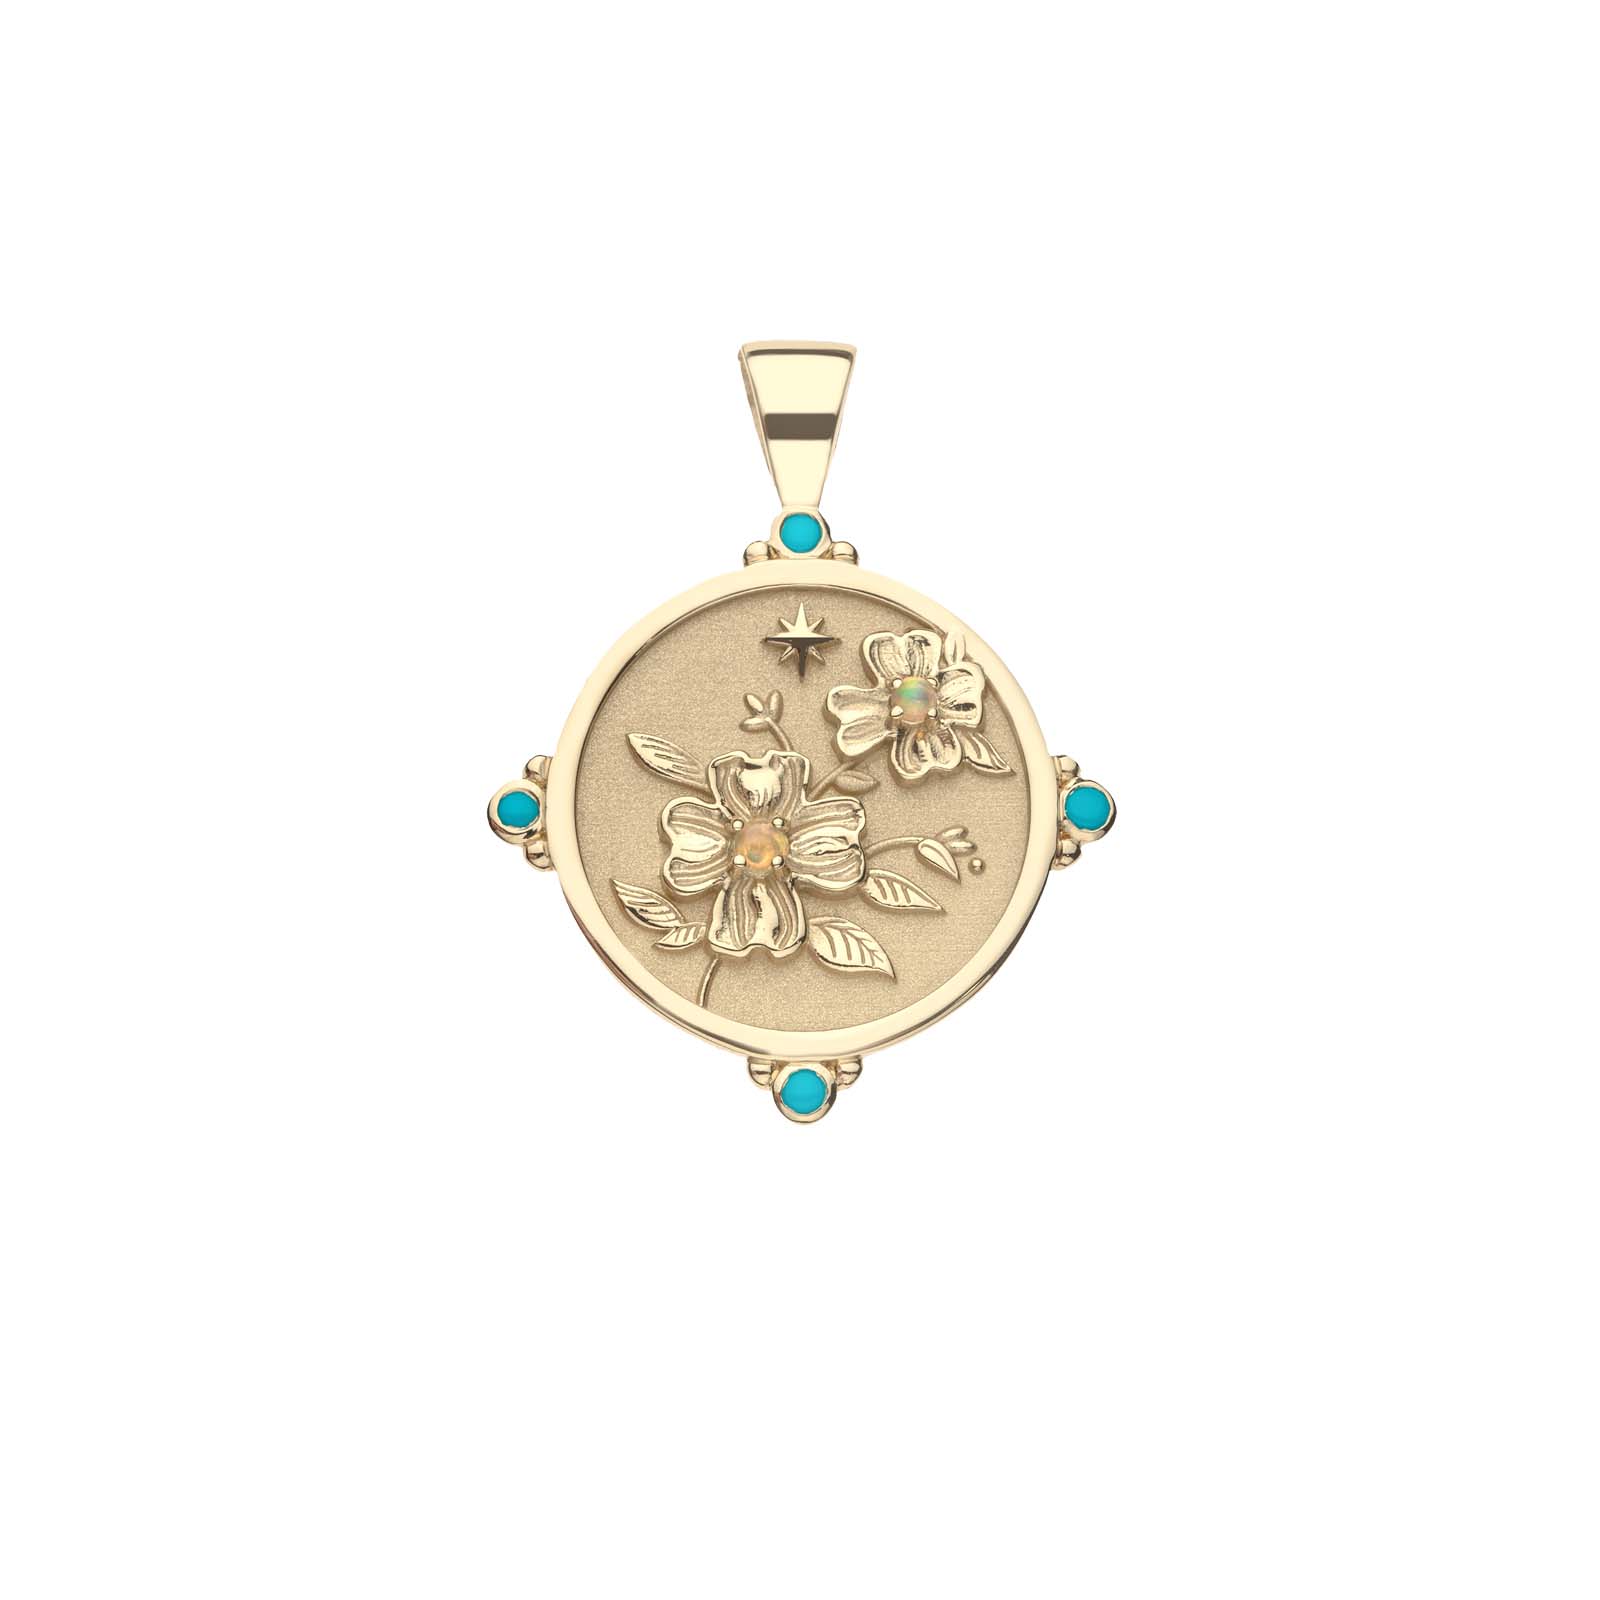 JW x House of Harris JOY Dogwood Flowers Small Pendant Coin in Solid Gold